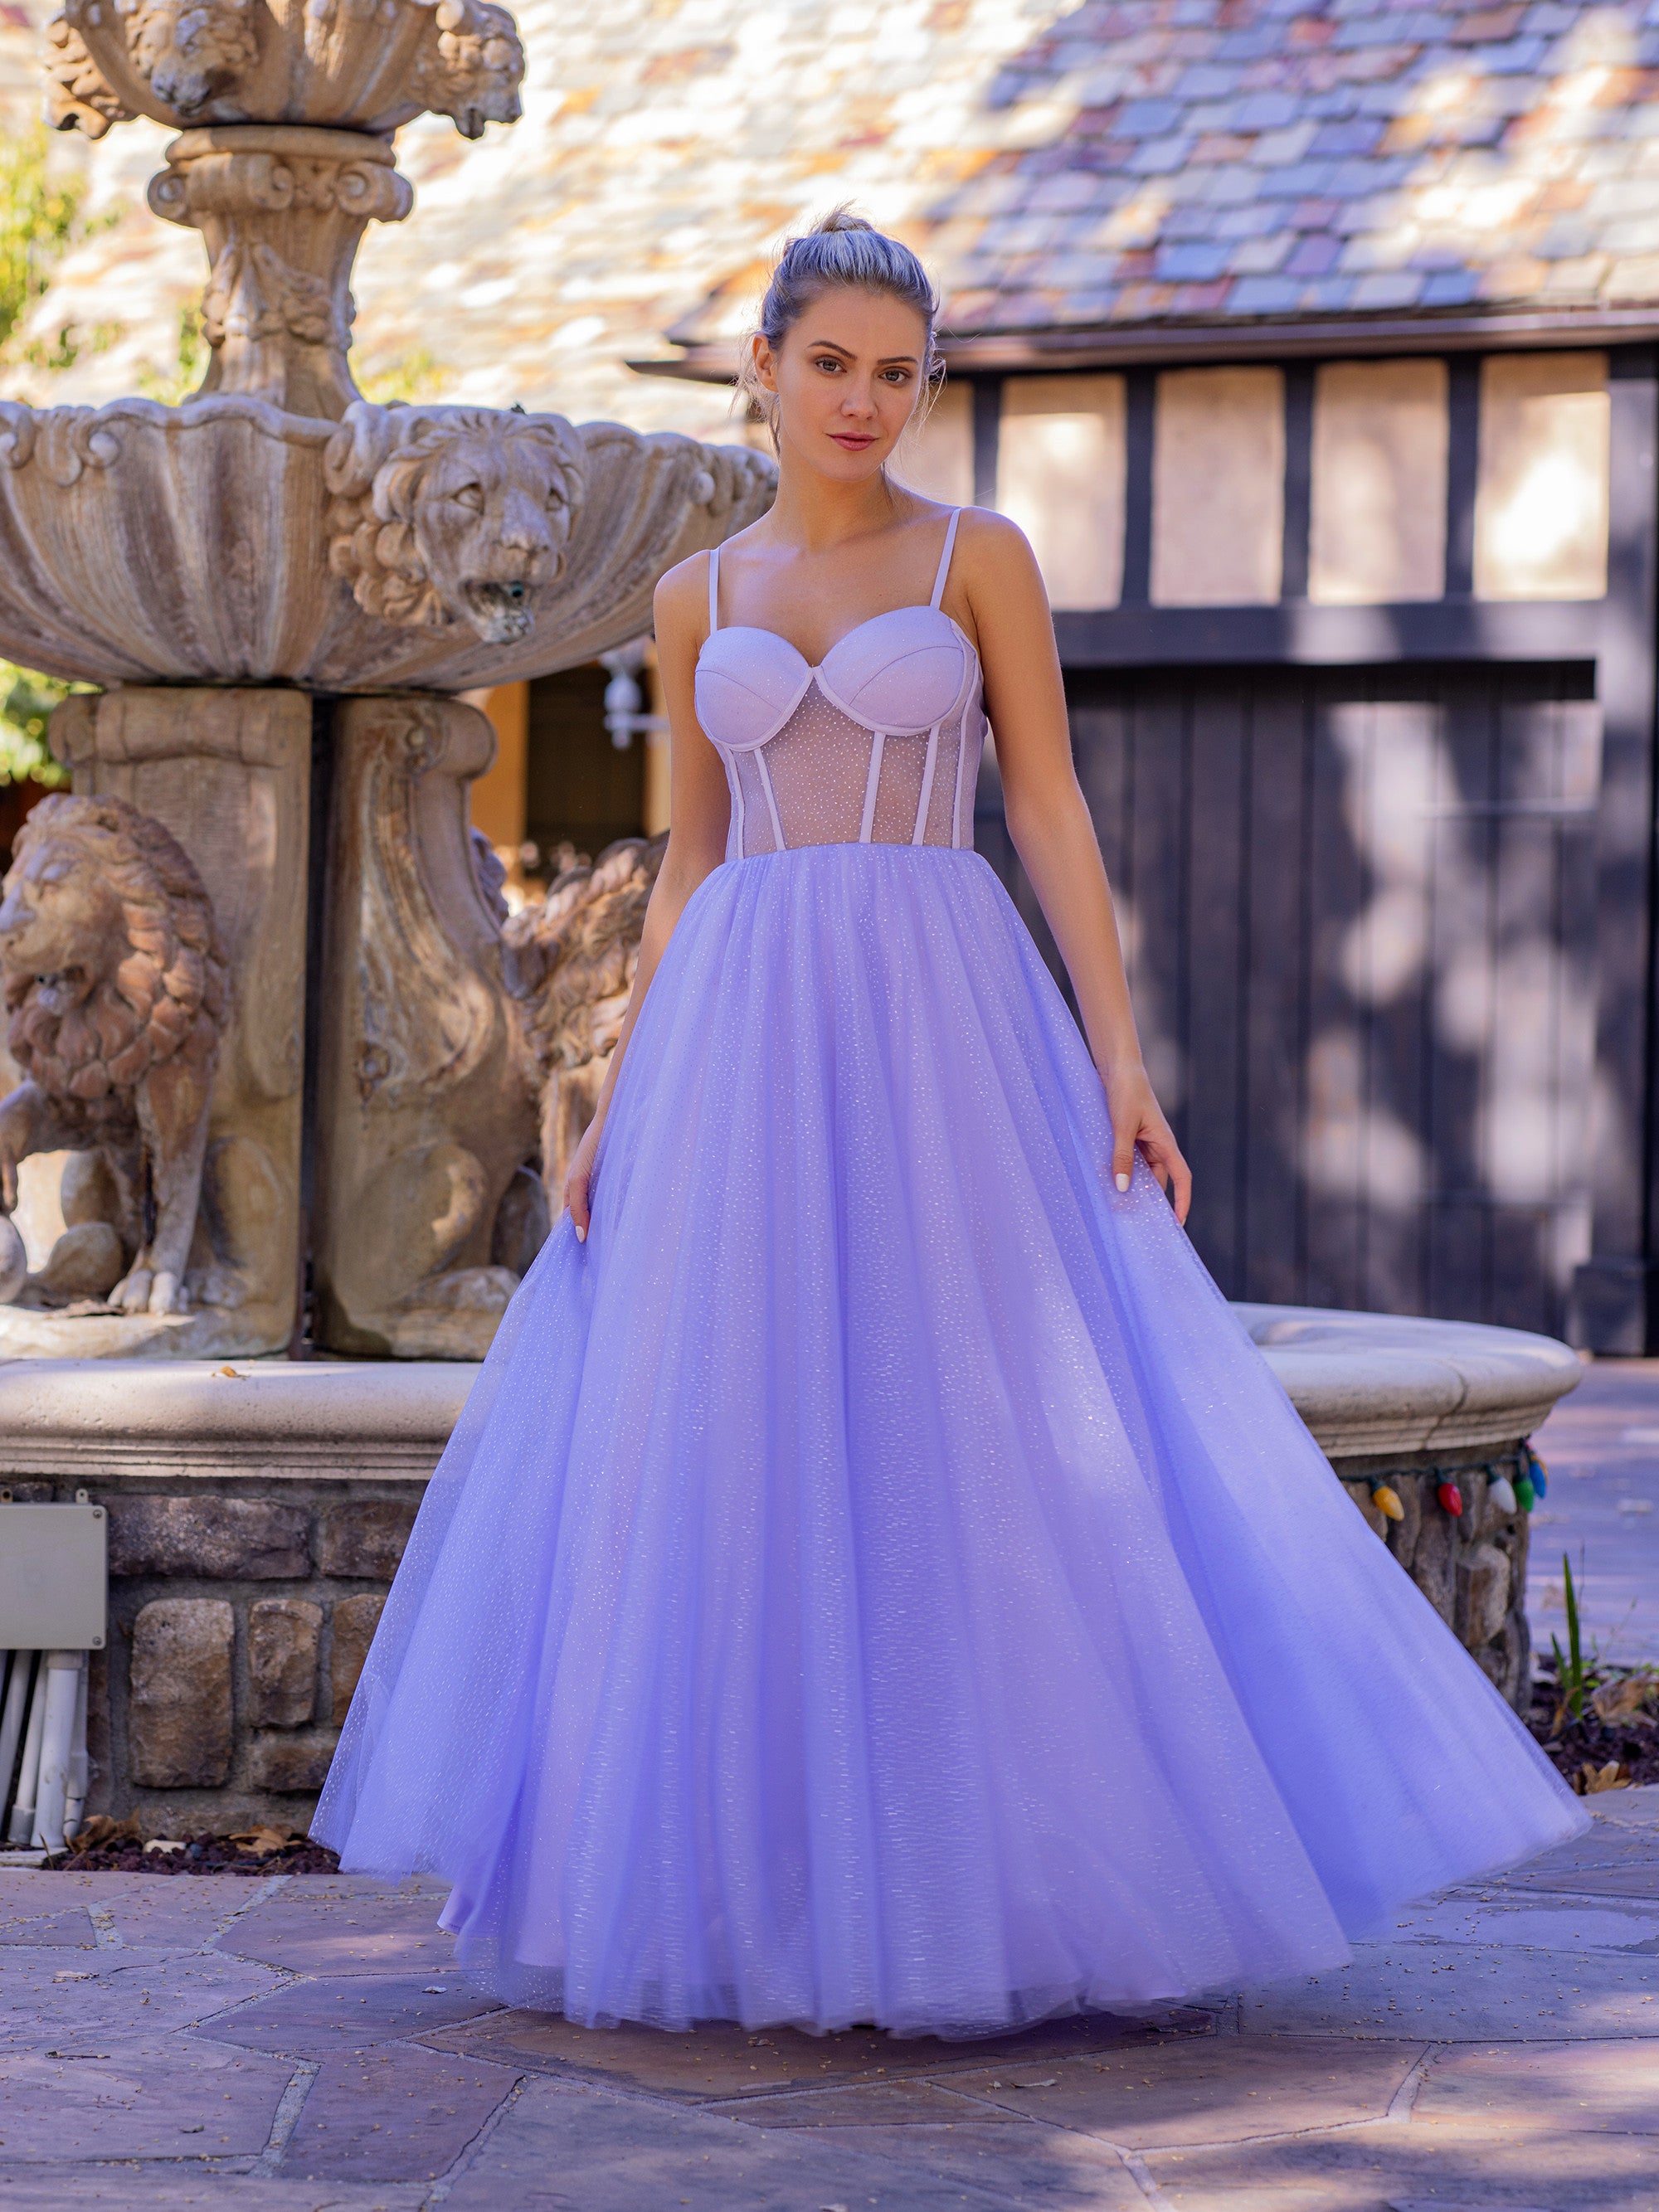 Purple Tulle A Line Purple Prom Dresses 2022 With 3D Flower Print,  Spaghetti Straps, Corset Back, And Sweep Train Perfect For Formal Parties,  Second Reception, Evening Events, Or Special Occasions Plus Size